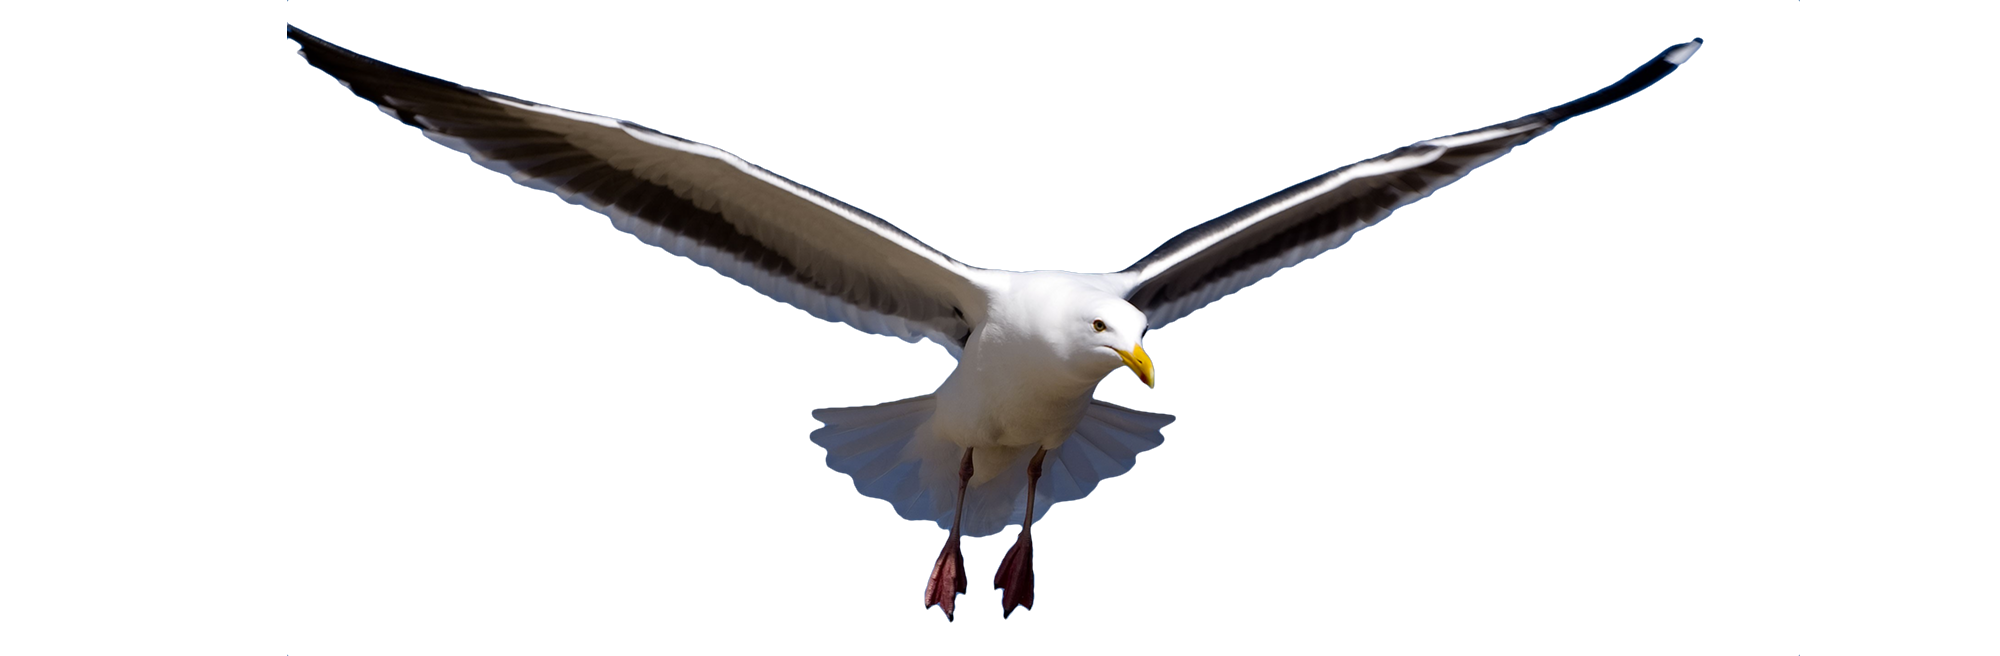 Gull PNG HQ Picture